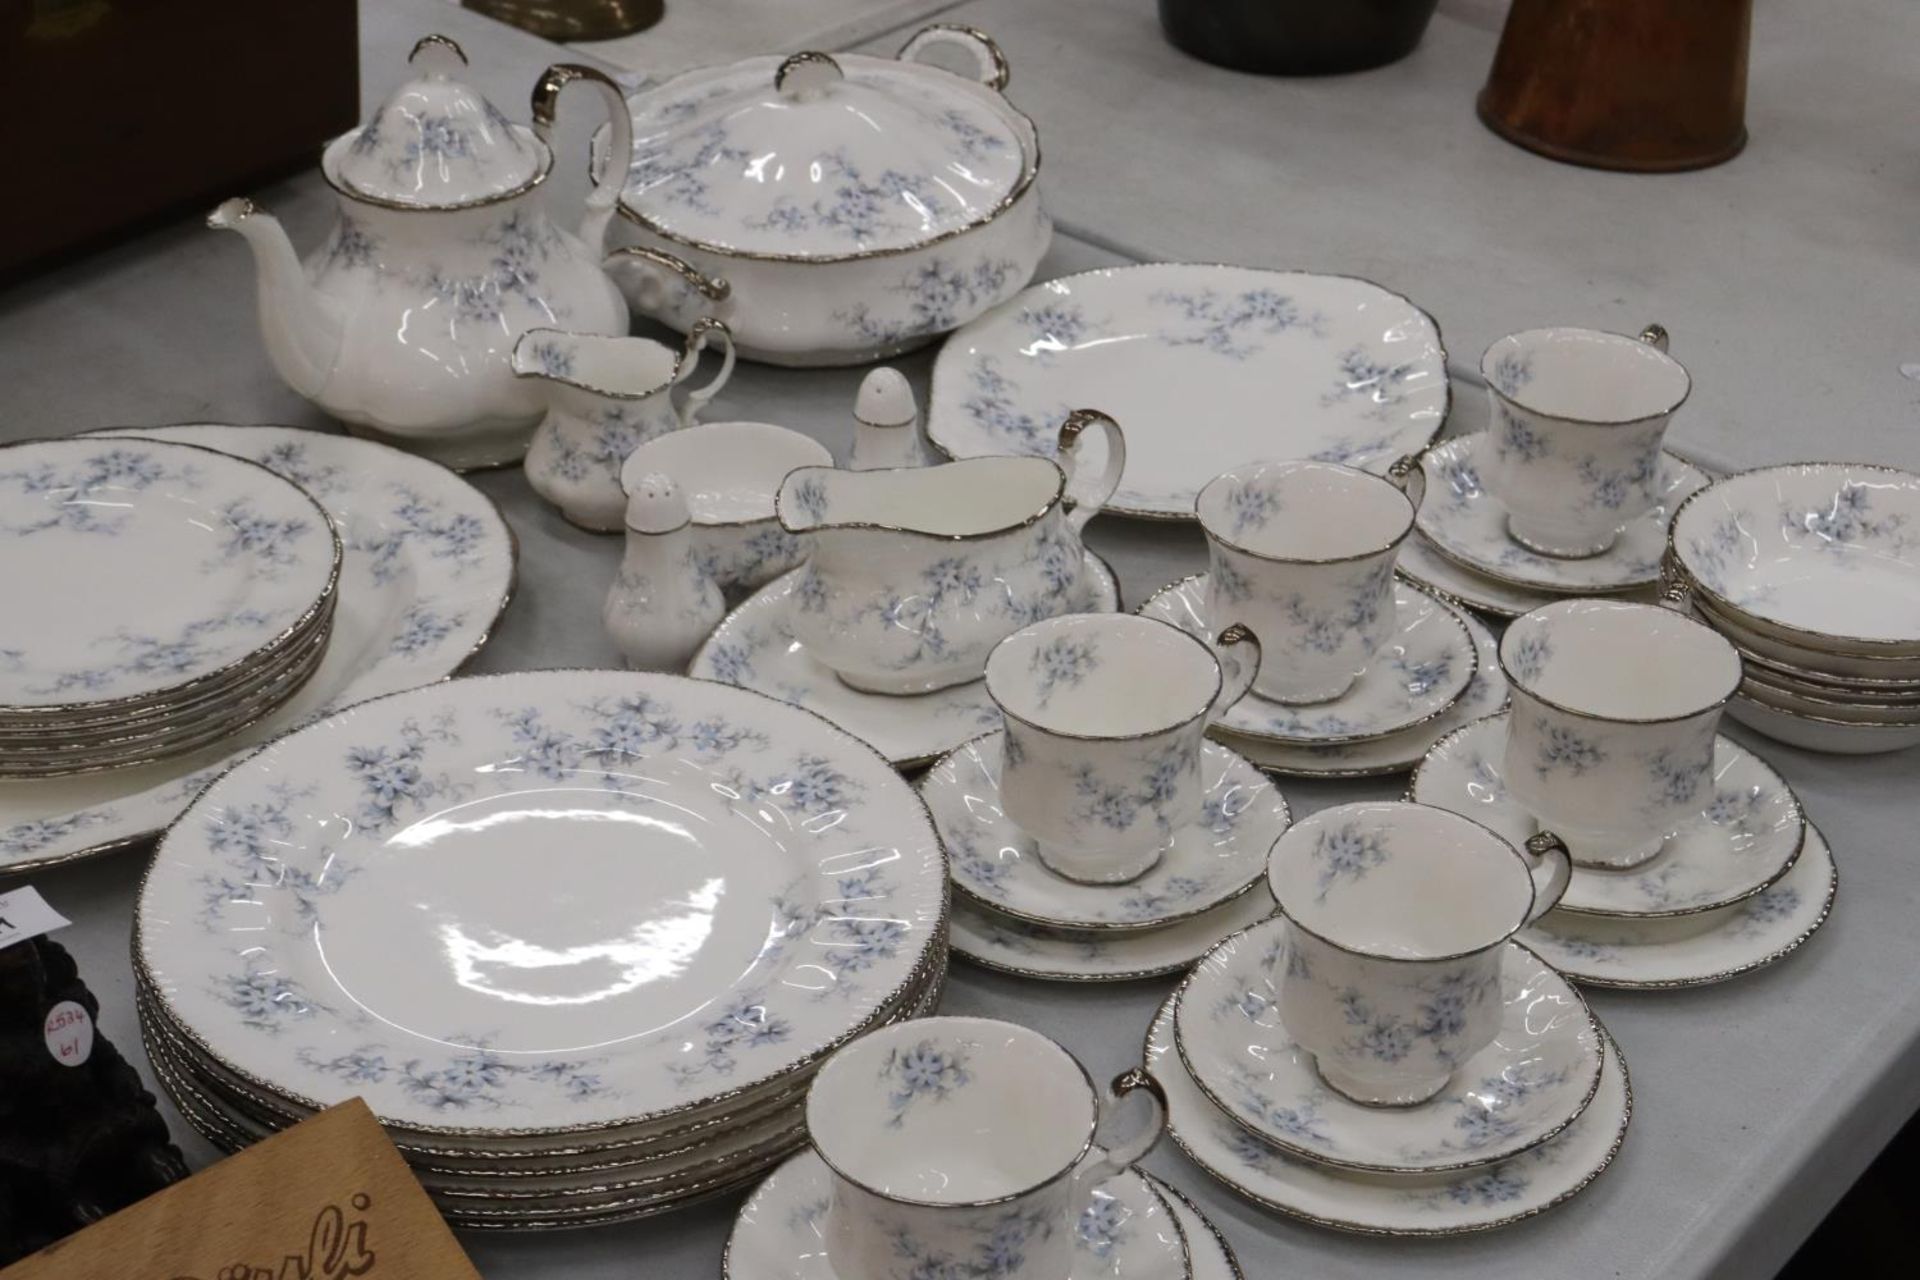 A PARAGON 'BRIDES CHOICE' DINNER SERVICE TO INCLUDE SIX OF EACH, DINNER, SALAD, SIDE PLATES, CUPS - Image 4 of 12